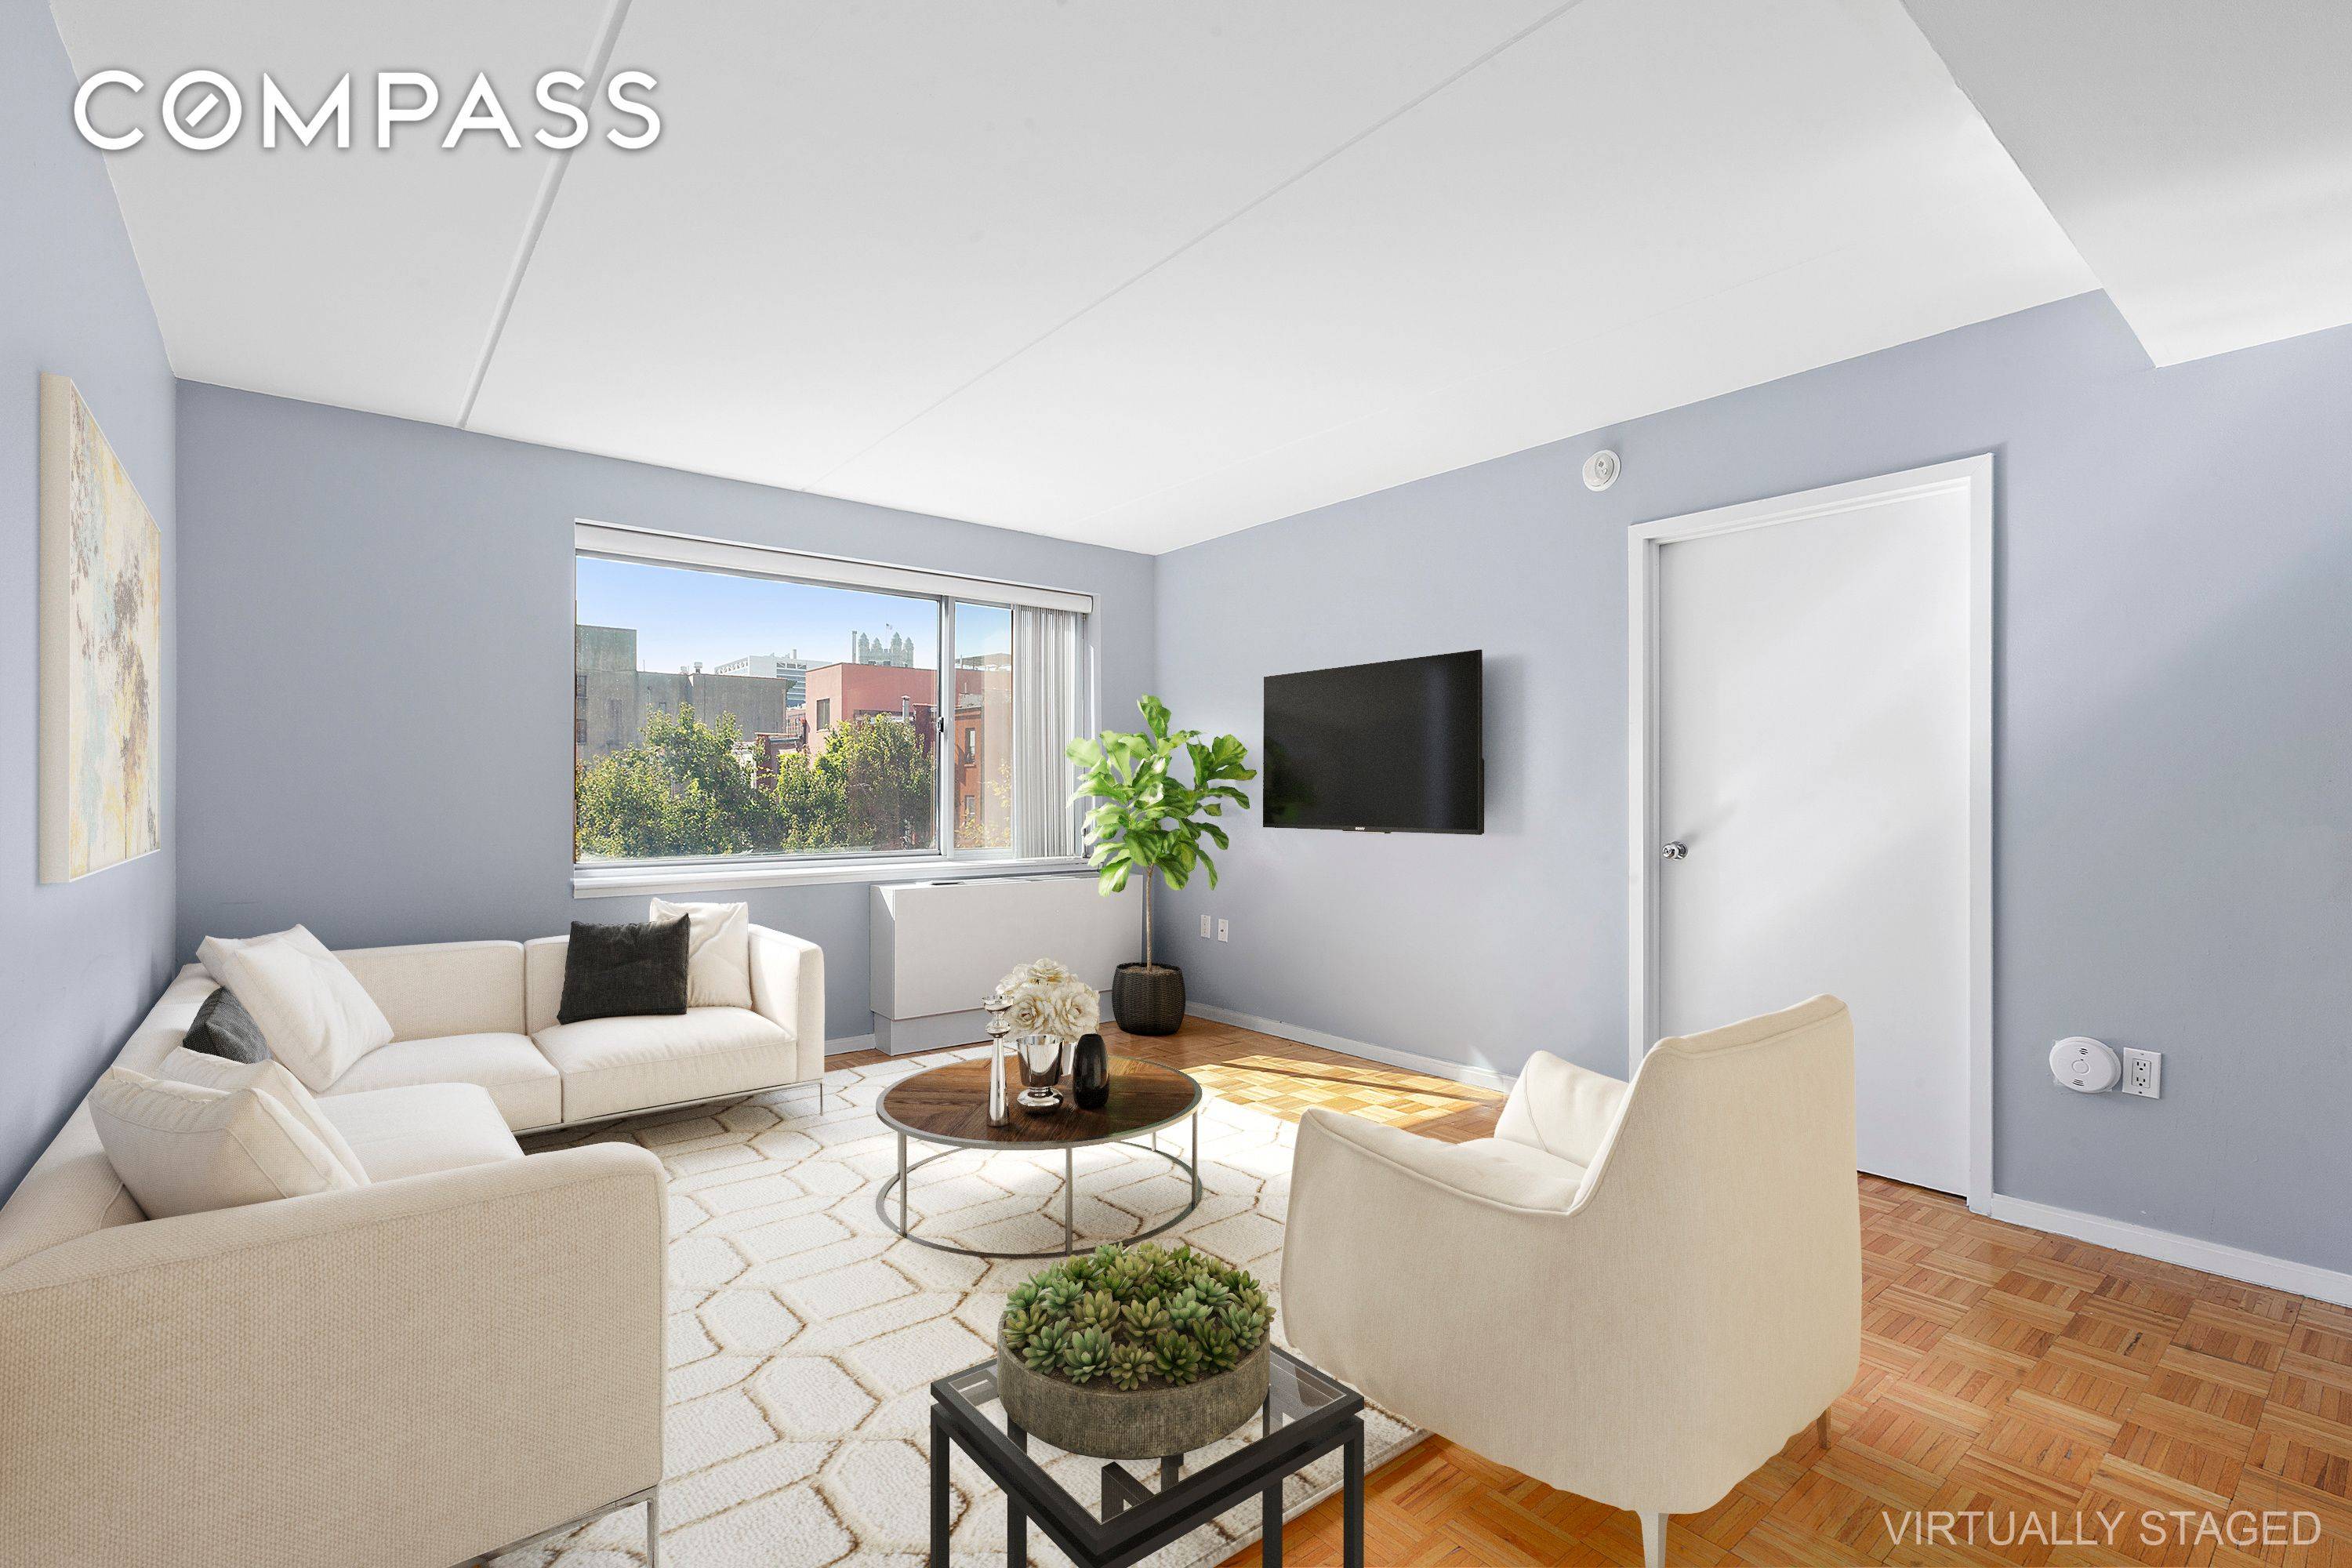 Back on the market Open, spacious and bright south facing 3BR 2BA apartment located in the heart of the Hamilton Heights neighborhood of Harlem.